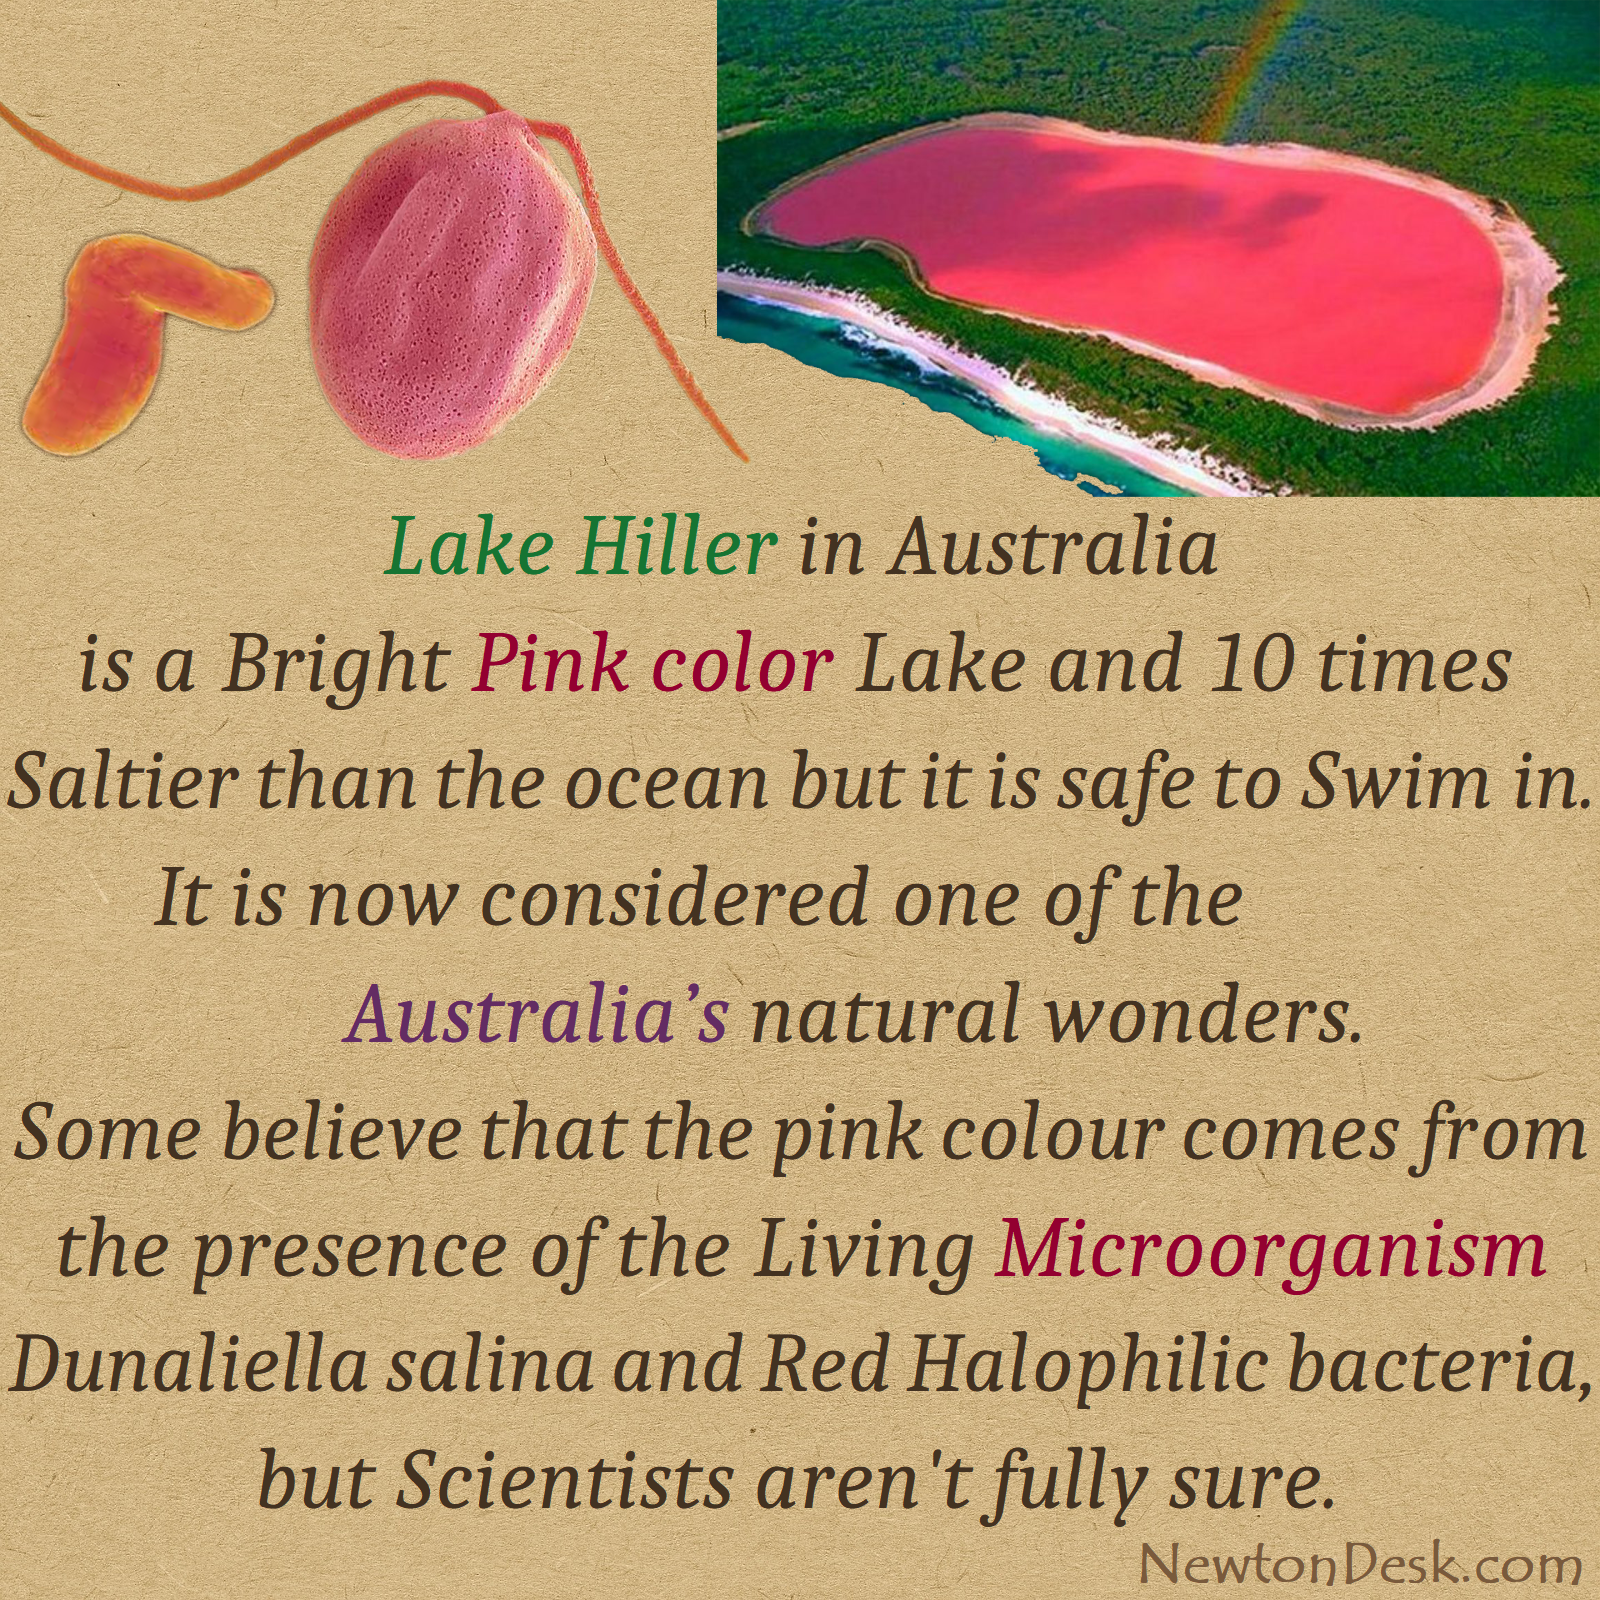 lake hillier facts